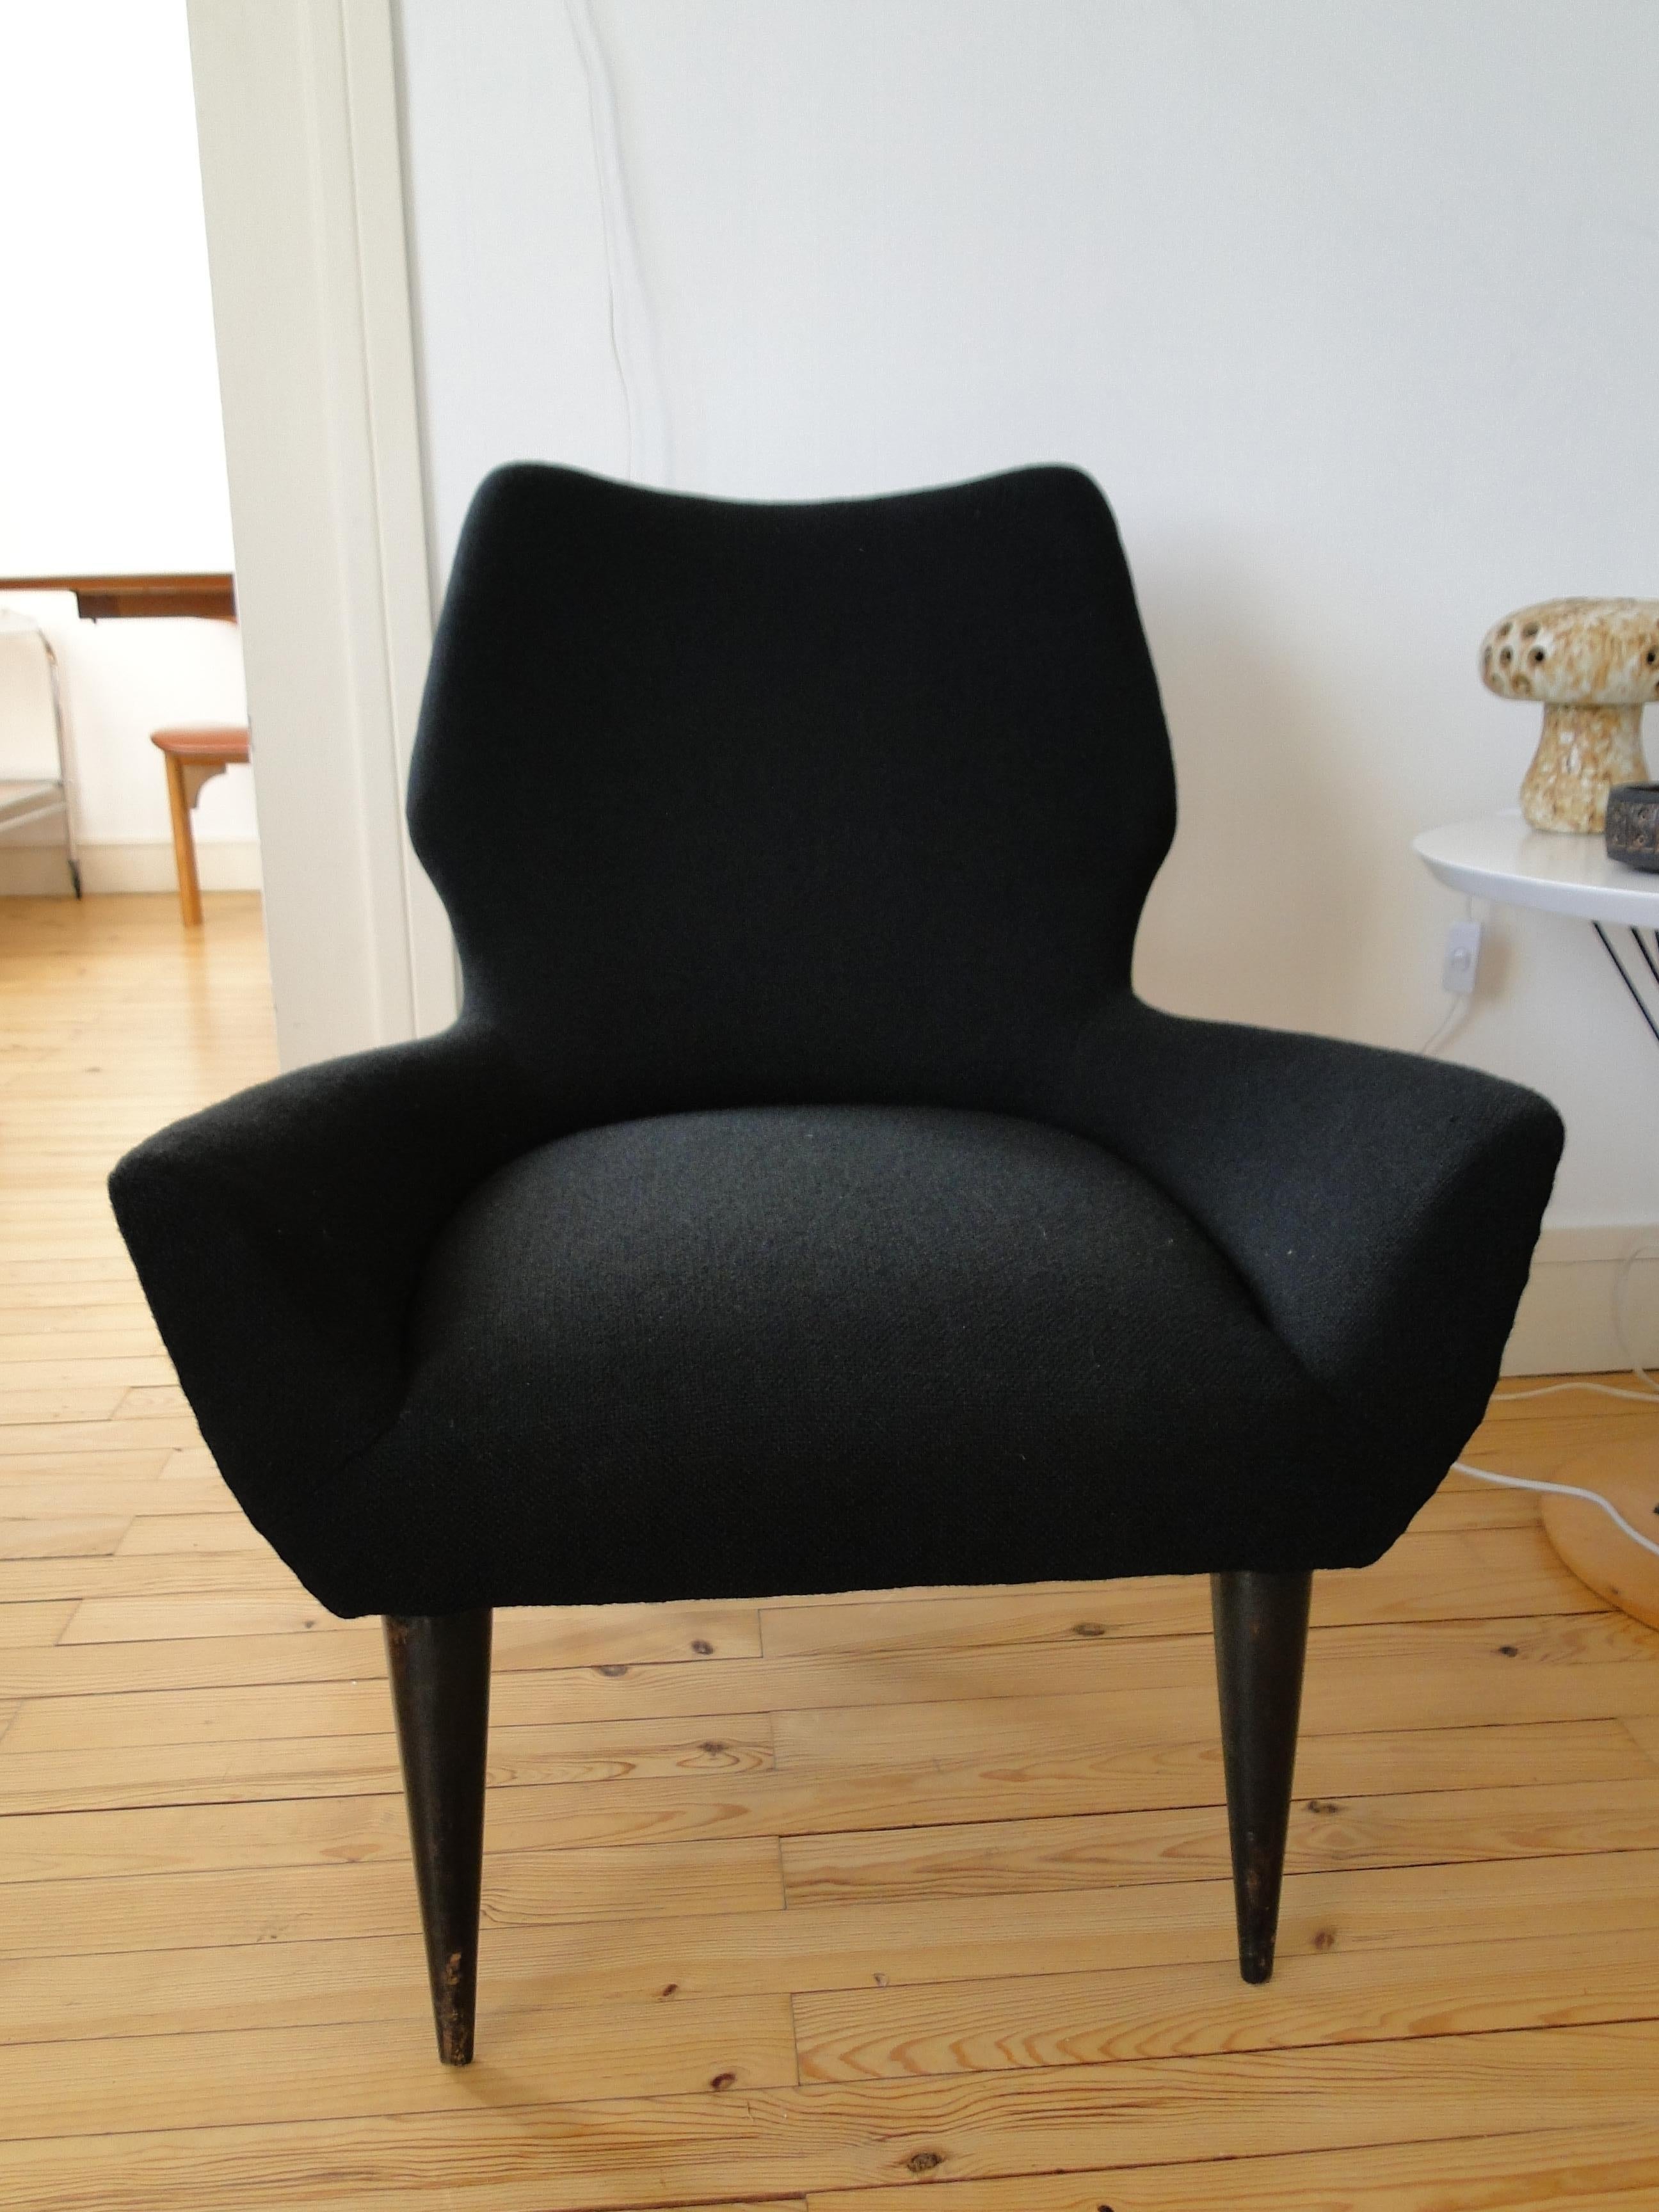 Lovely Italian armchair from the 60s. 
Completely renovated and covered with a black fabric from kvadrat. 
Very comfortable with its elegant curves and easy to move.

Good condition.